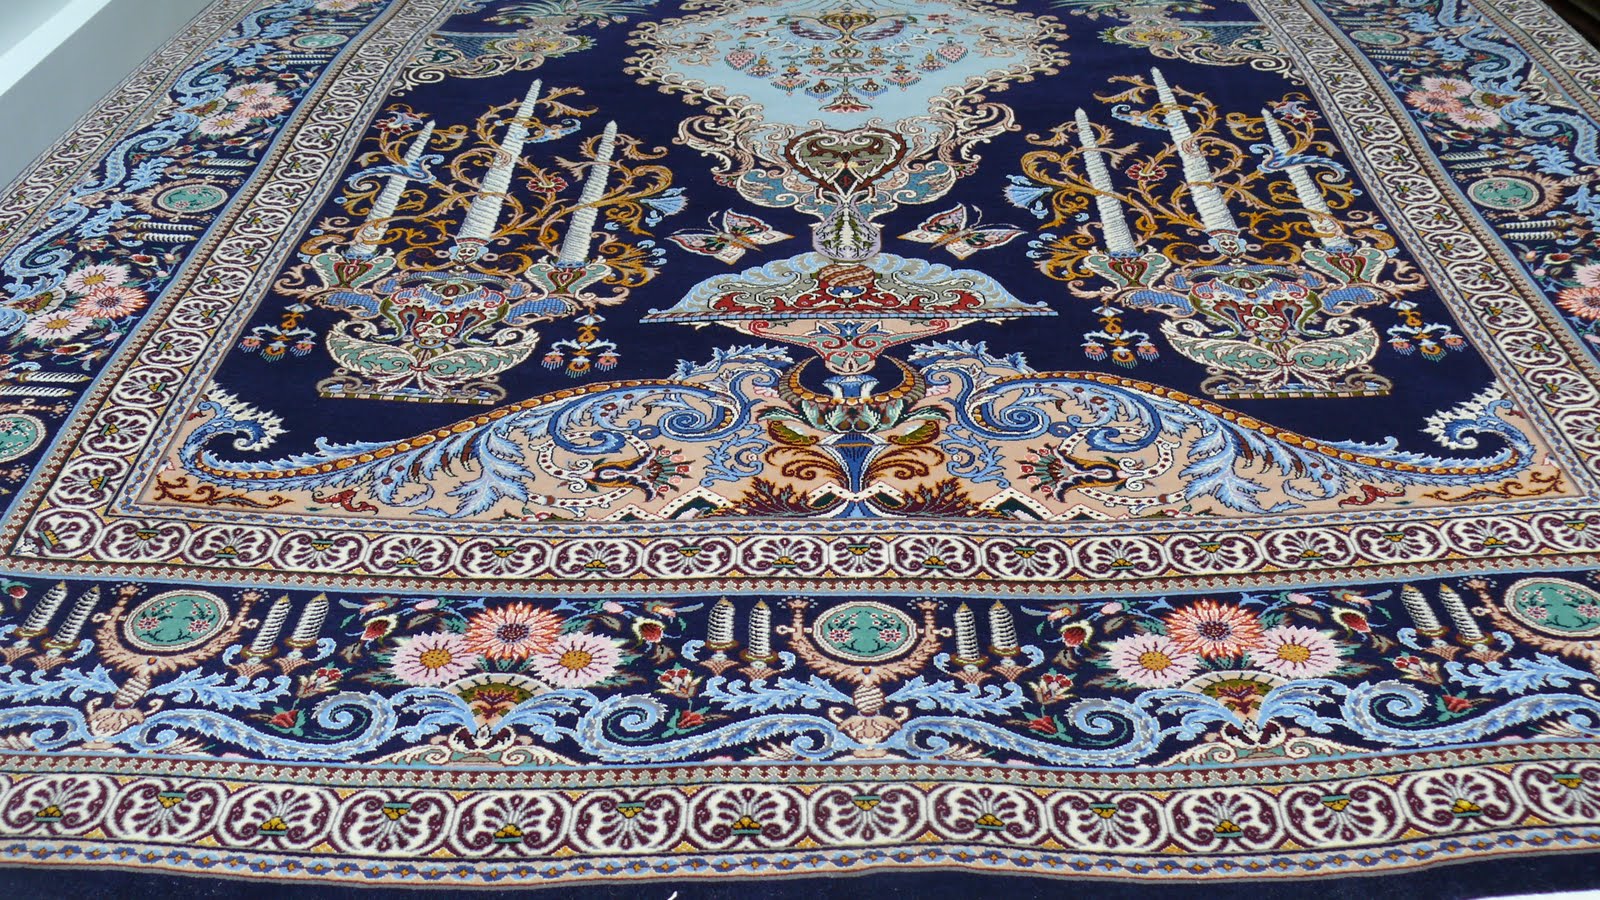 Iran to begin direct carpet export to US soon